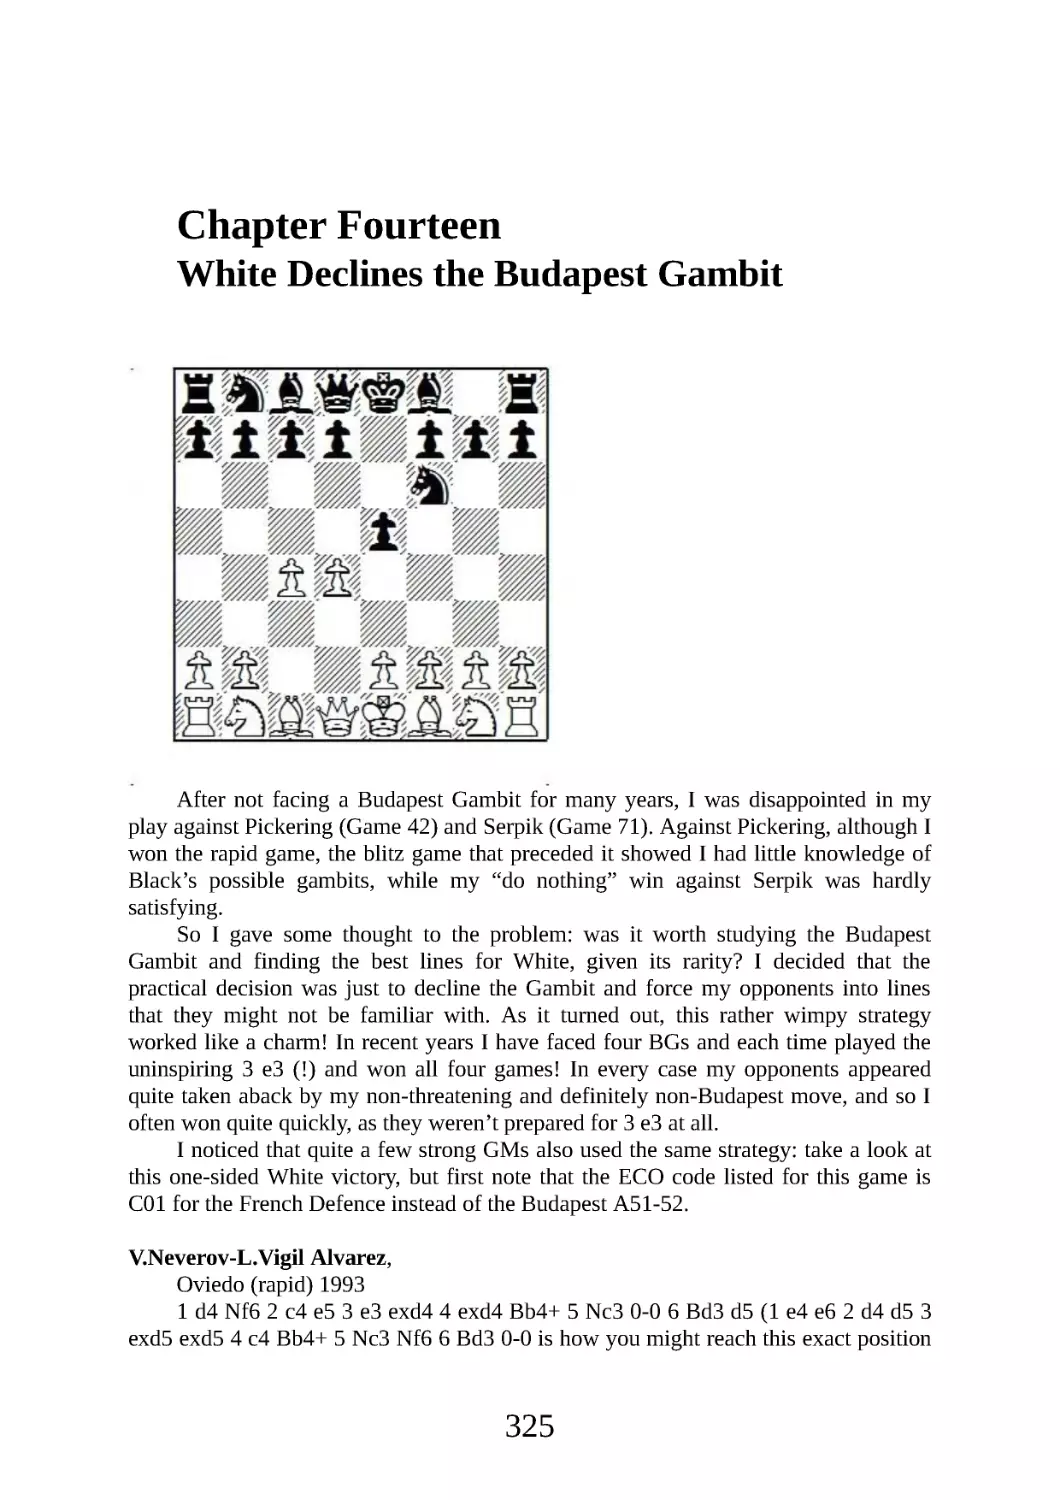 14 White Declines the Budapest Gambit